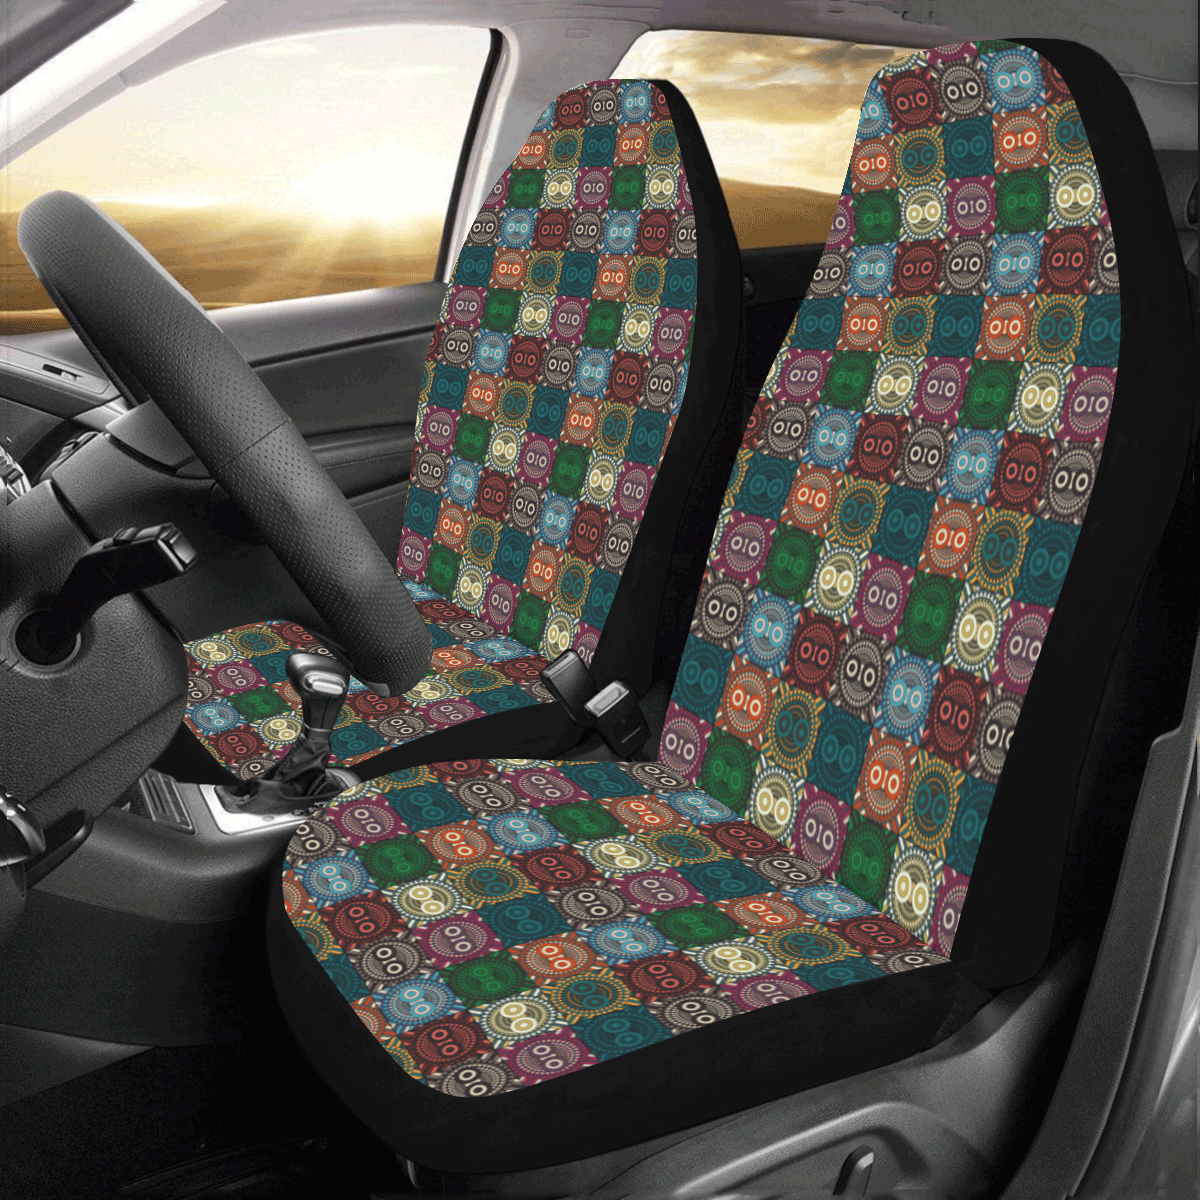 Polychrome Owl Car Seat Covers (Set of 2)